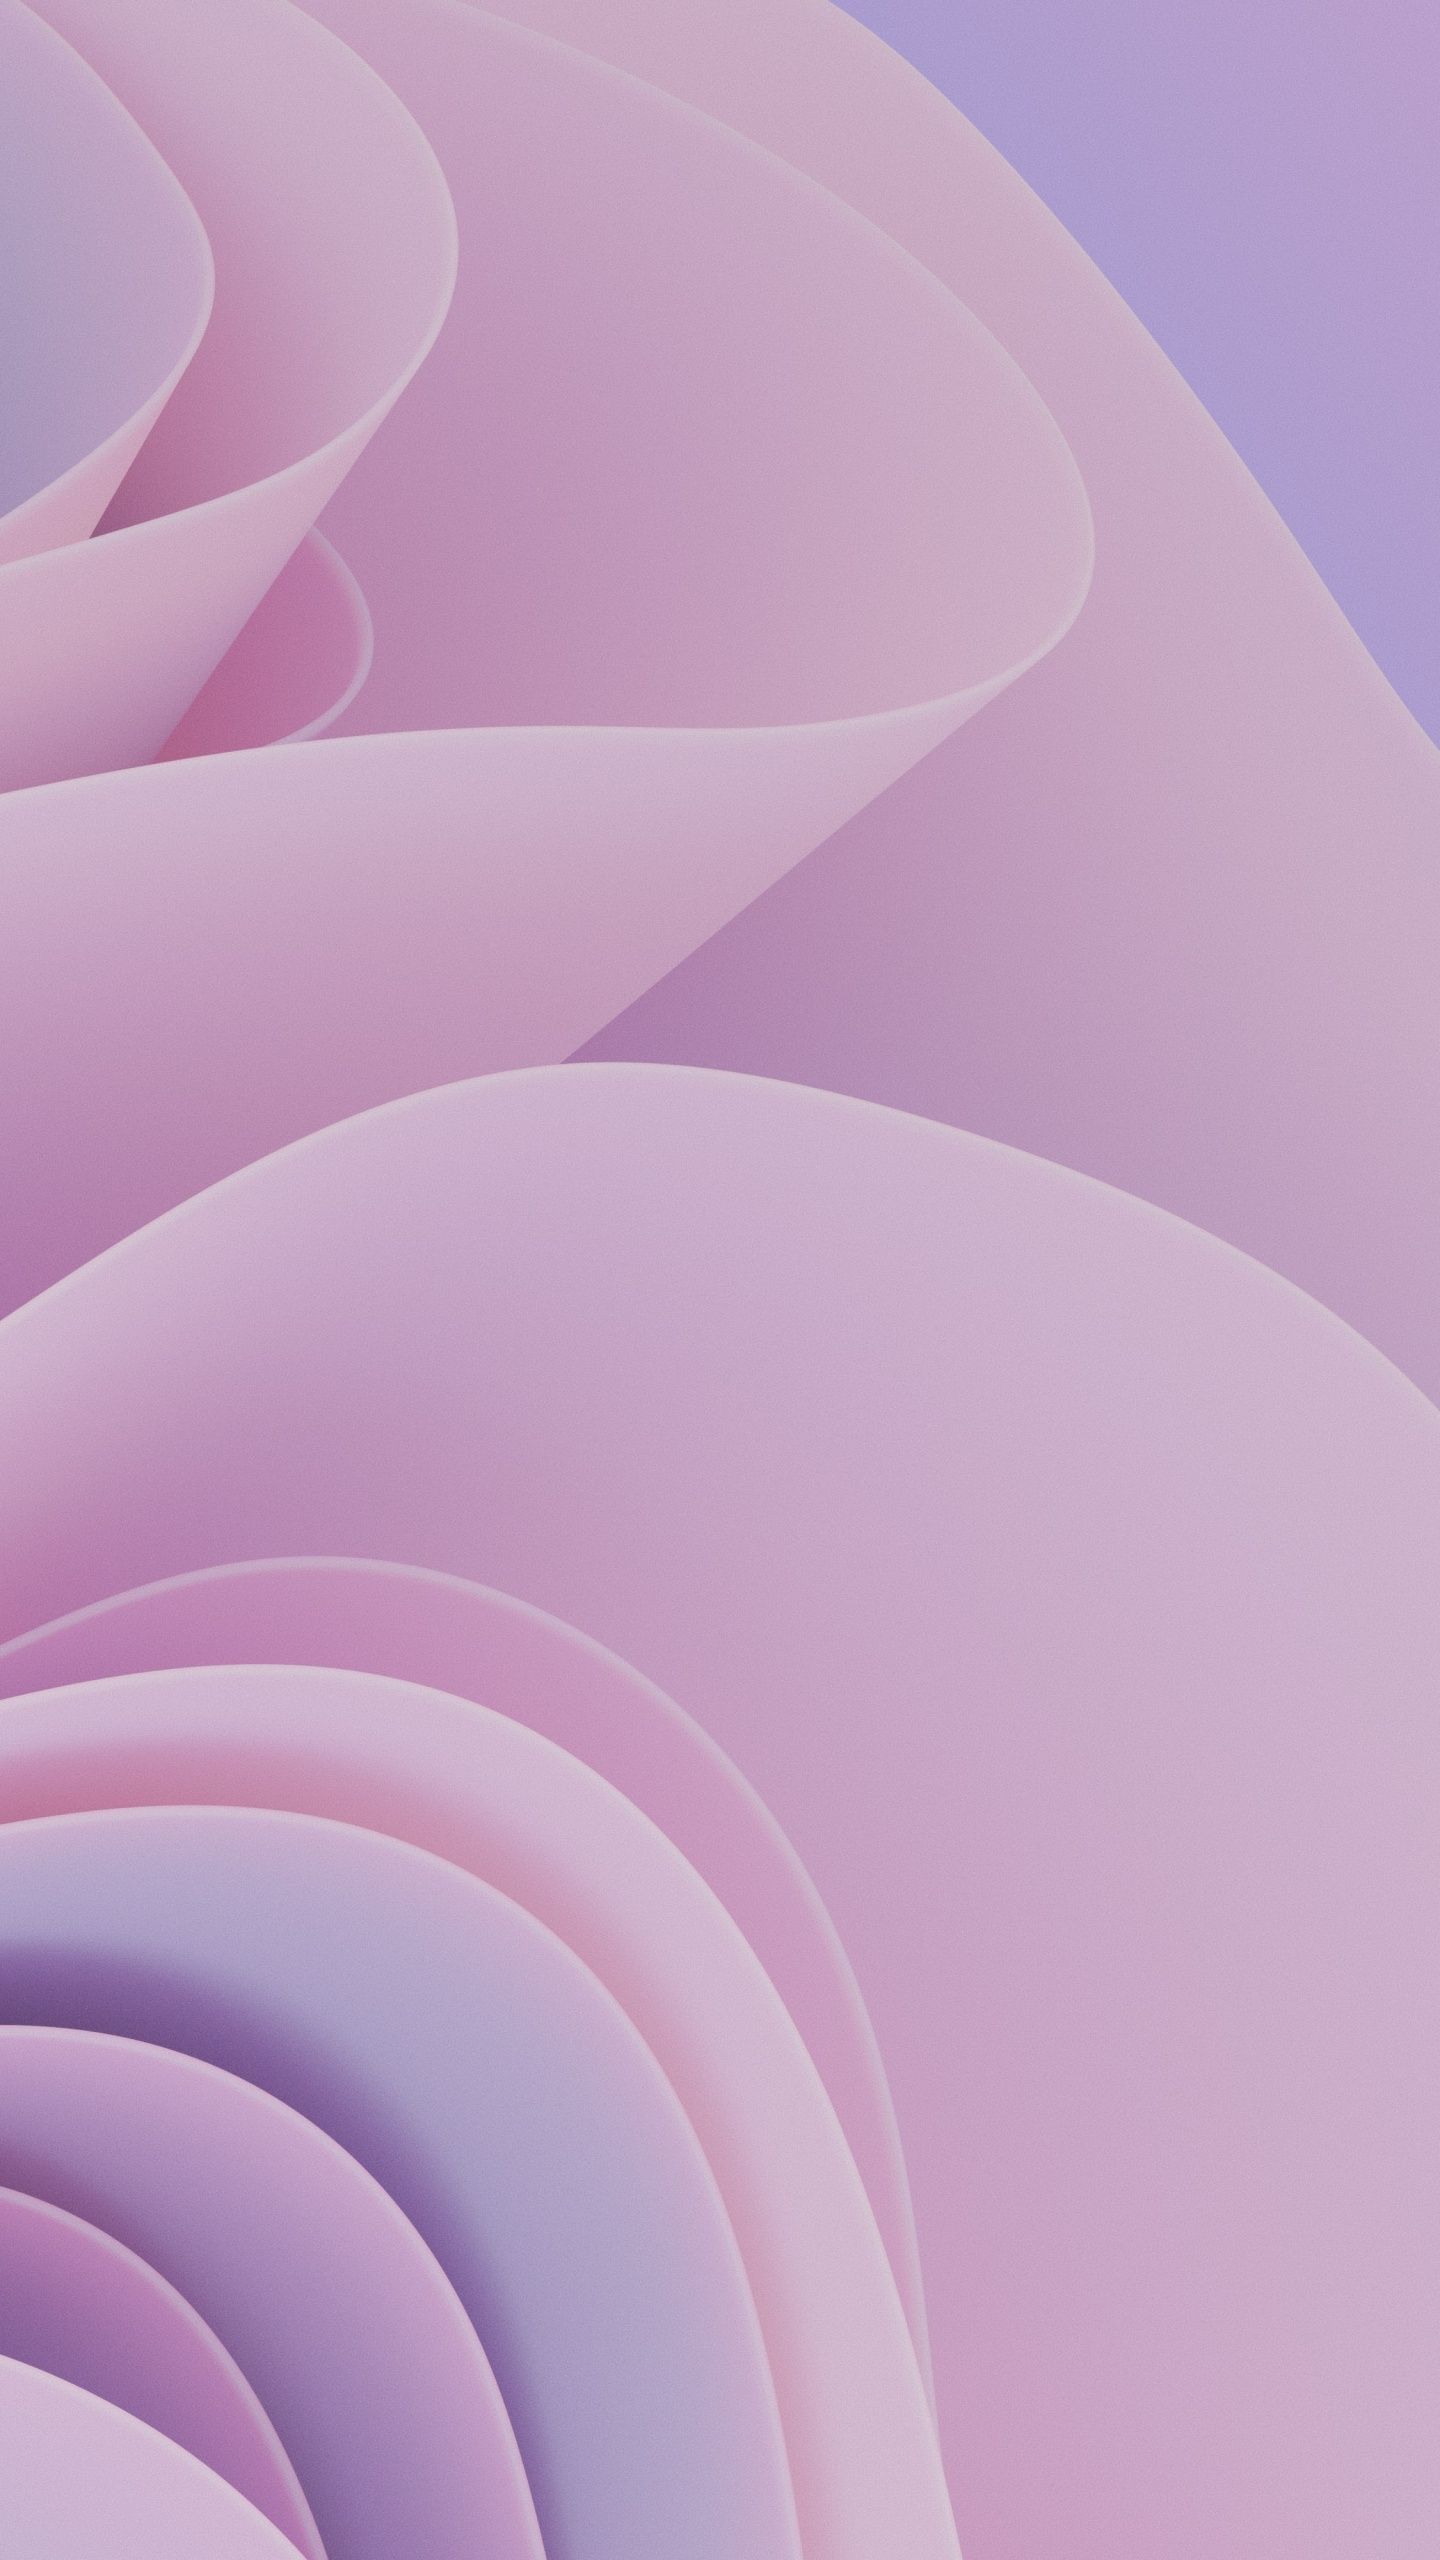 3D Render Wallpaper 4K, Waves, Girly, Abstract